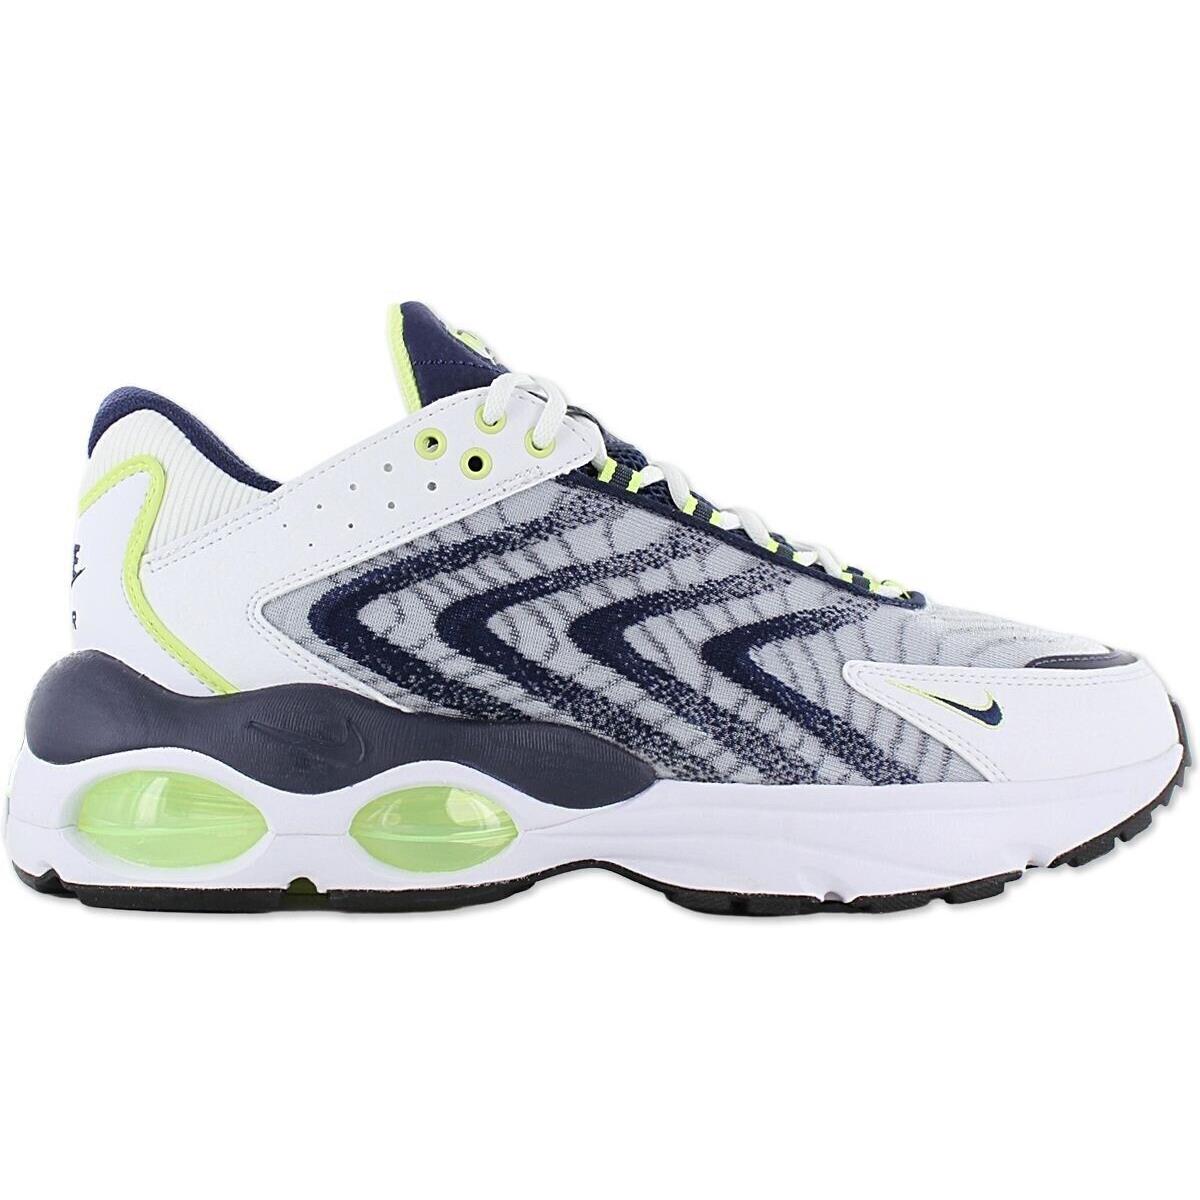 Nike Air Max Mens TW Running Shoes Size 13 Box NO Lid DQ3984 101 - WHITE/MIDNIGHT NAVY